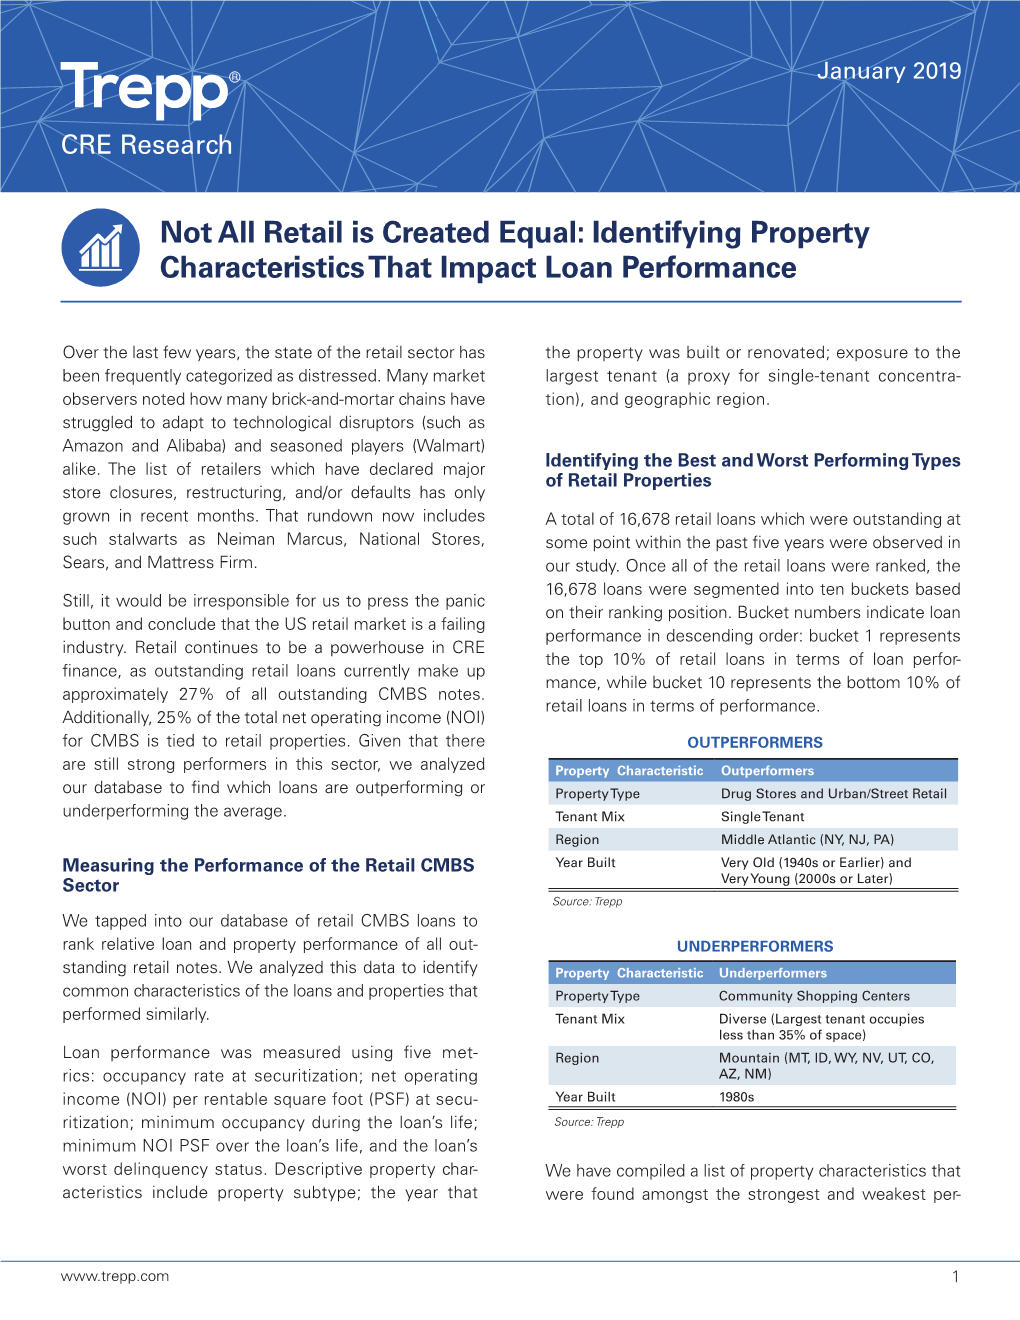 Not All Retail Is Created Equal: Identifying Property Characteristics That Impact Loan Performance